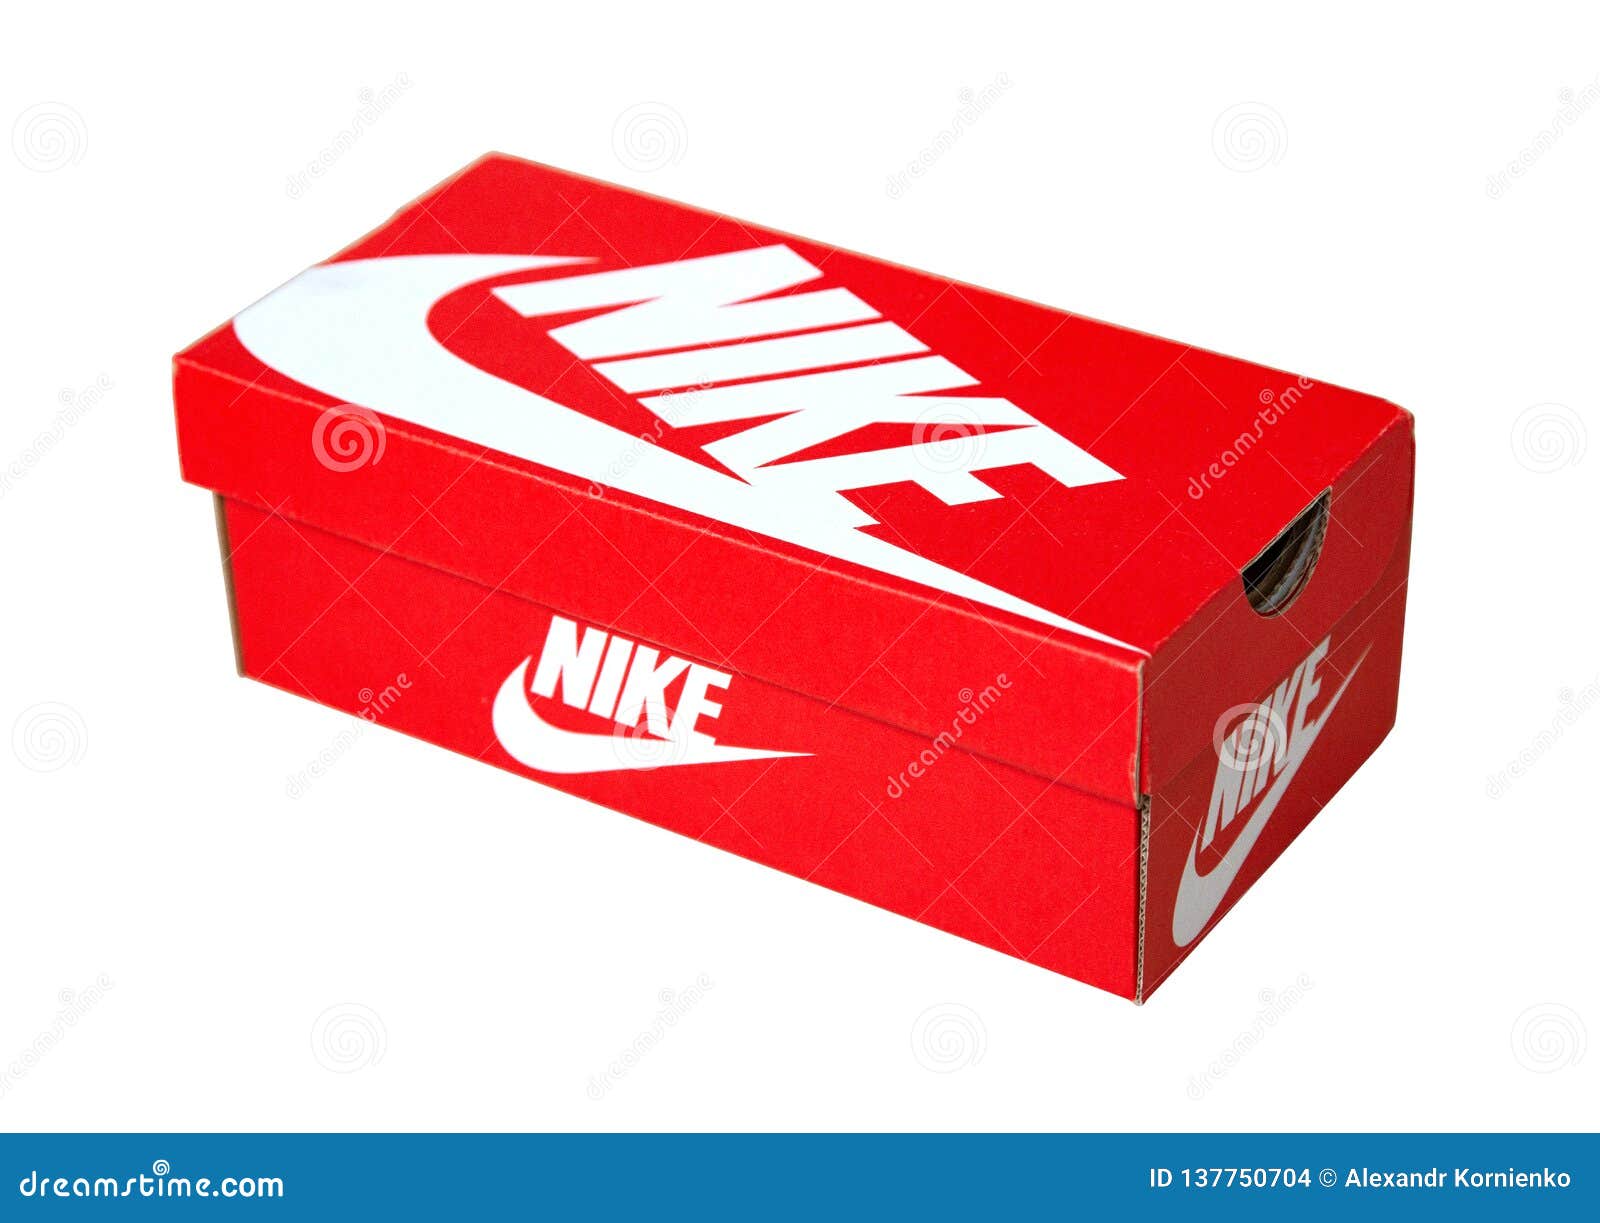 240 Nike Box Stock Photos - Free & Royalty-Free Stock Photos from Dreamstime